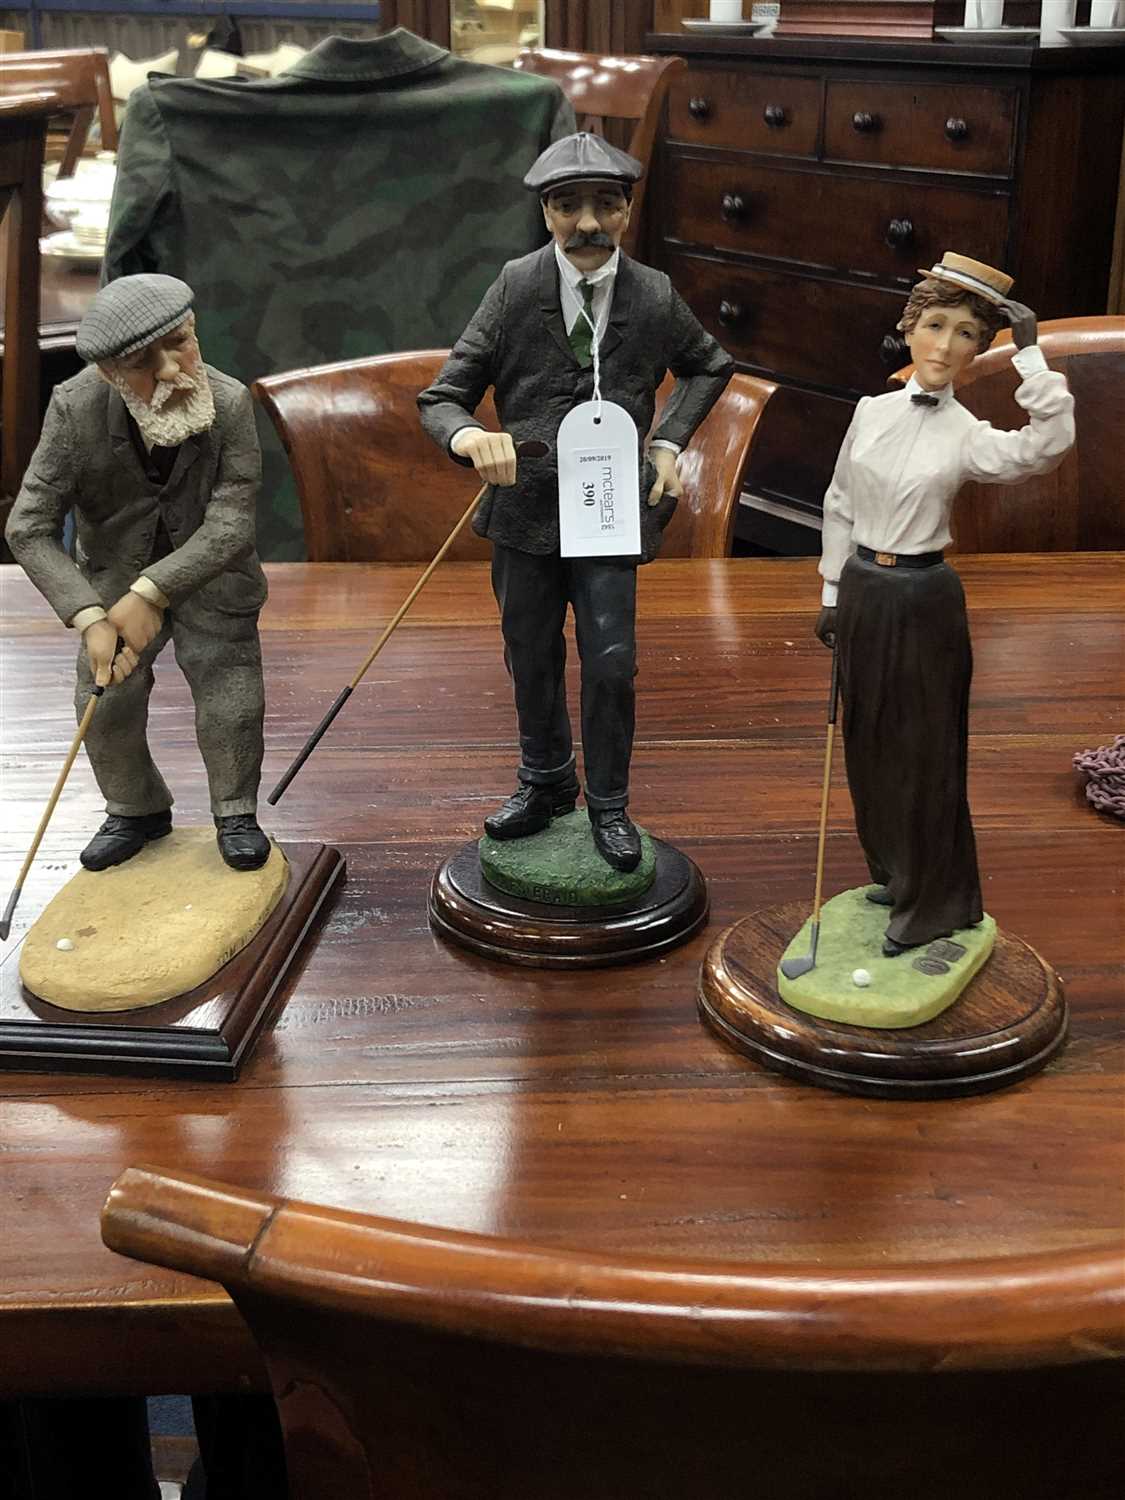 Lot 390 - A LOT OF THREE GOLFING FIGURES